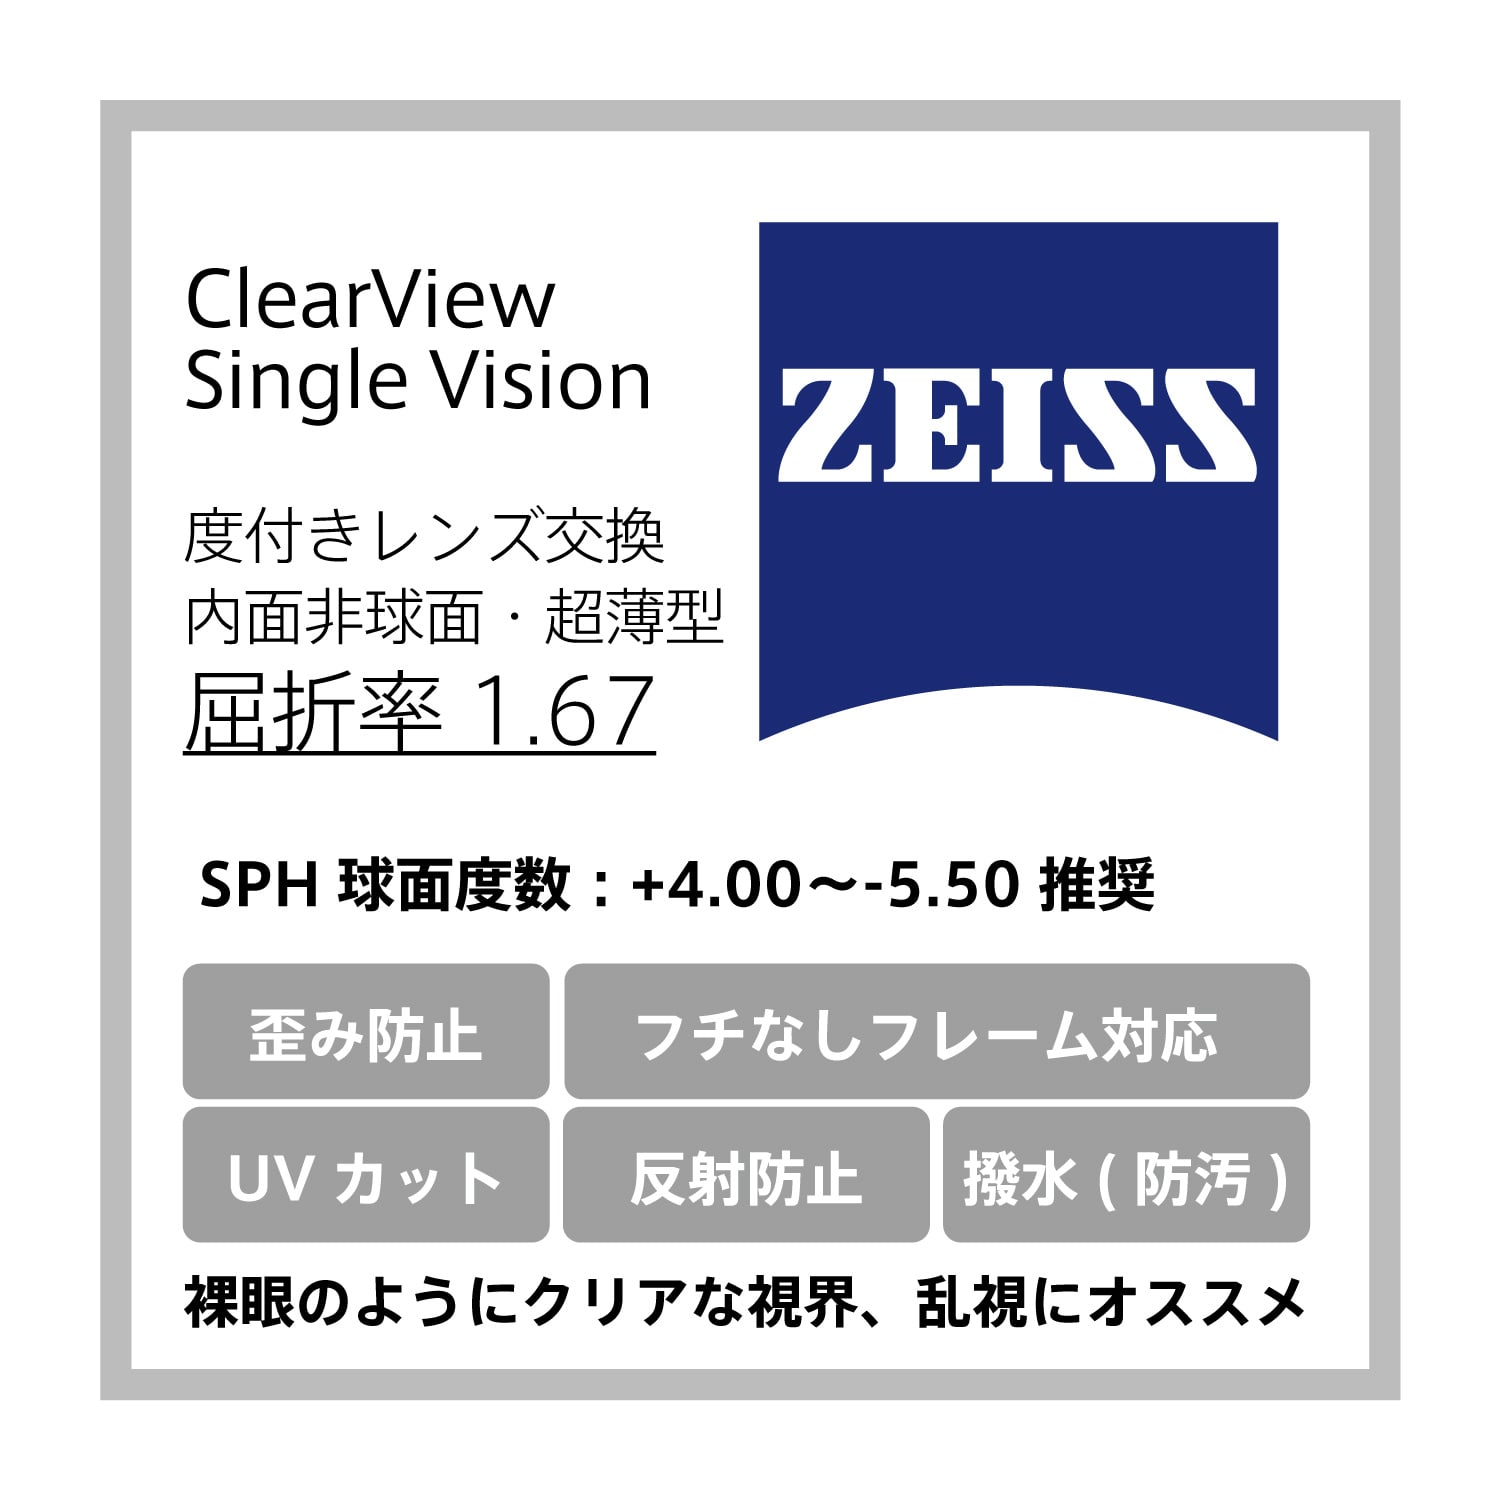 zeiss ClearView Silgle Vision 眼鏡用内面非球面レンズ 1.67